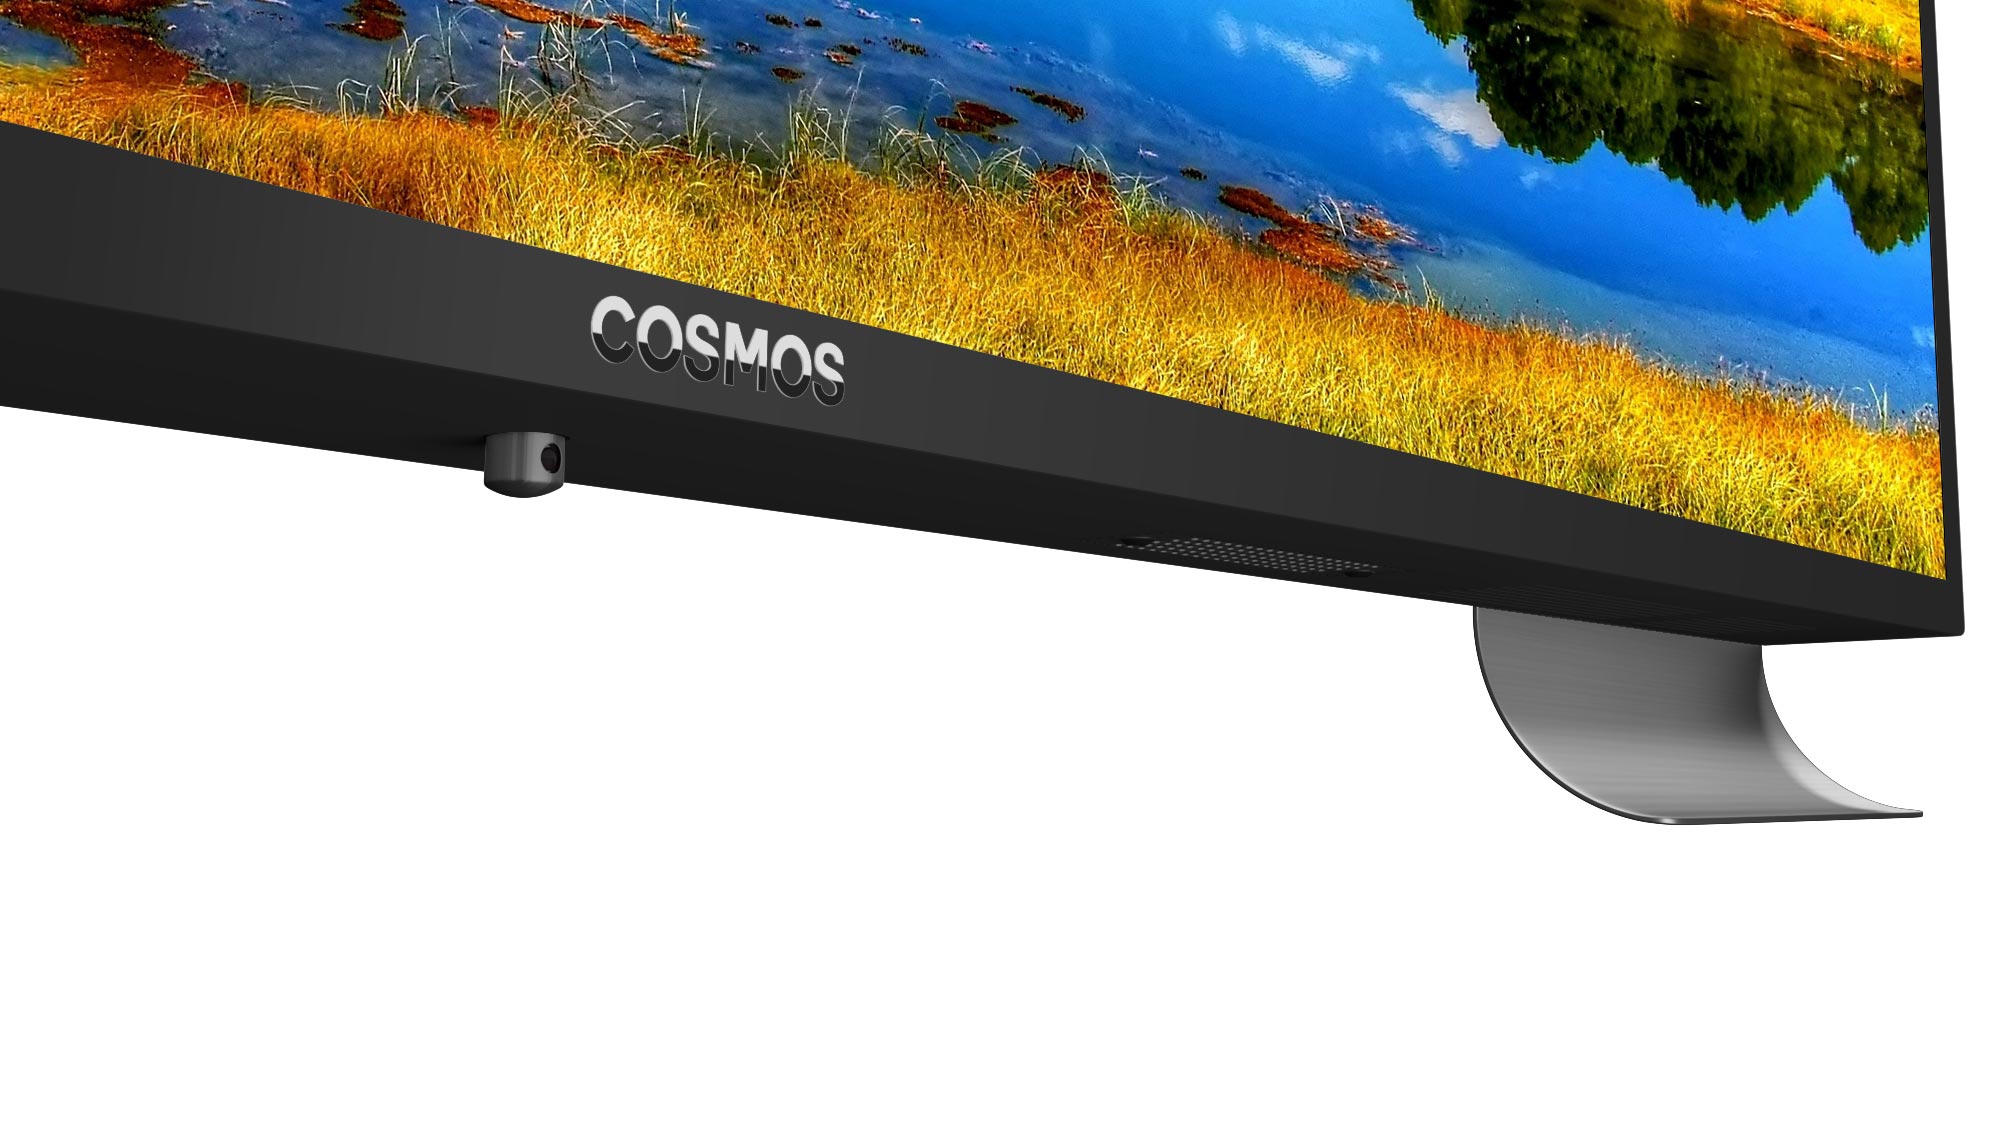 Cosmos TV with a black matte finish, its sleek design showcasing understated elegance and modern technology.